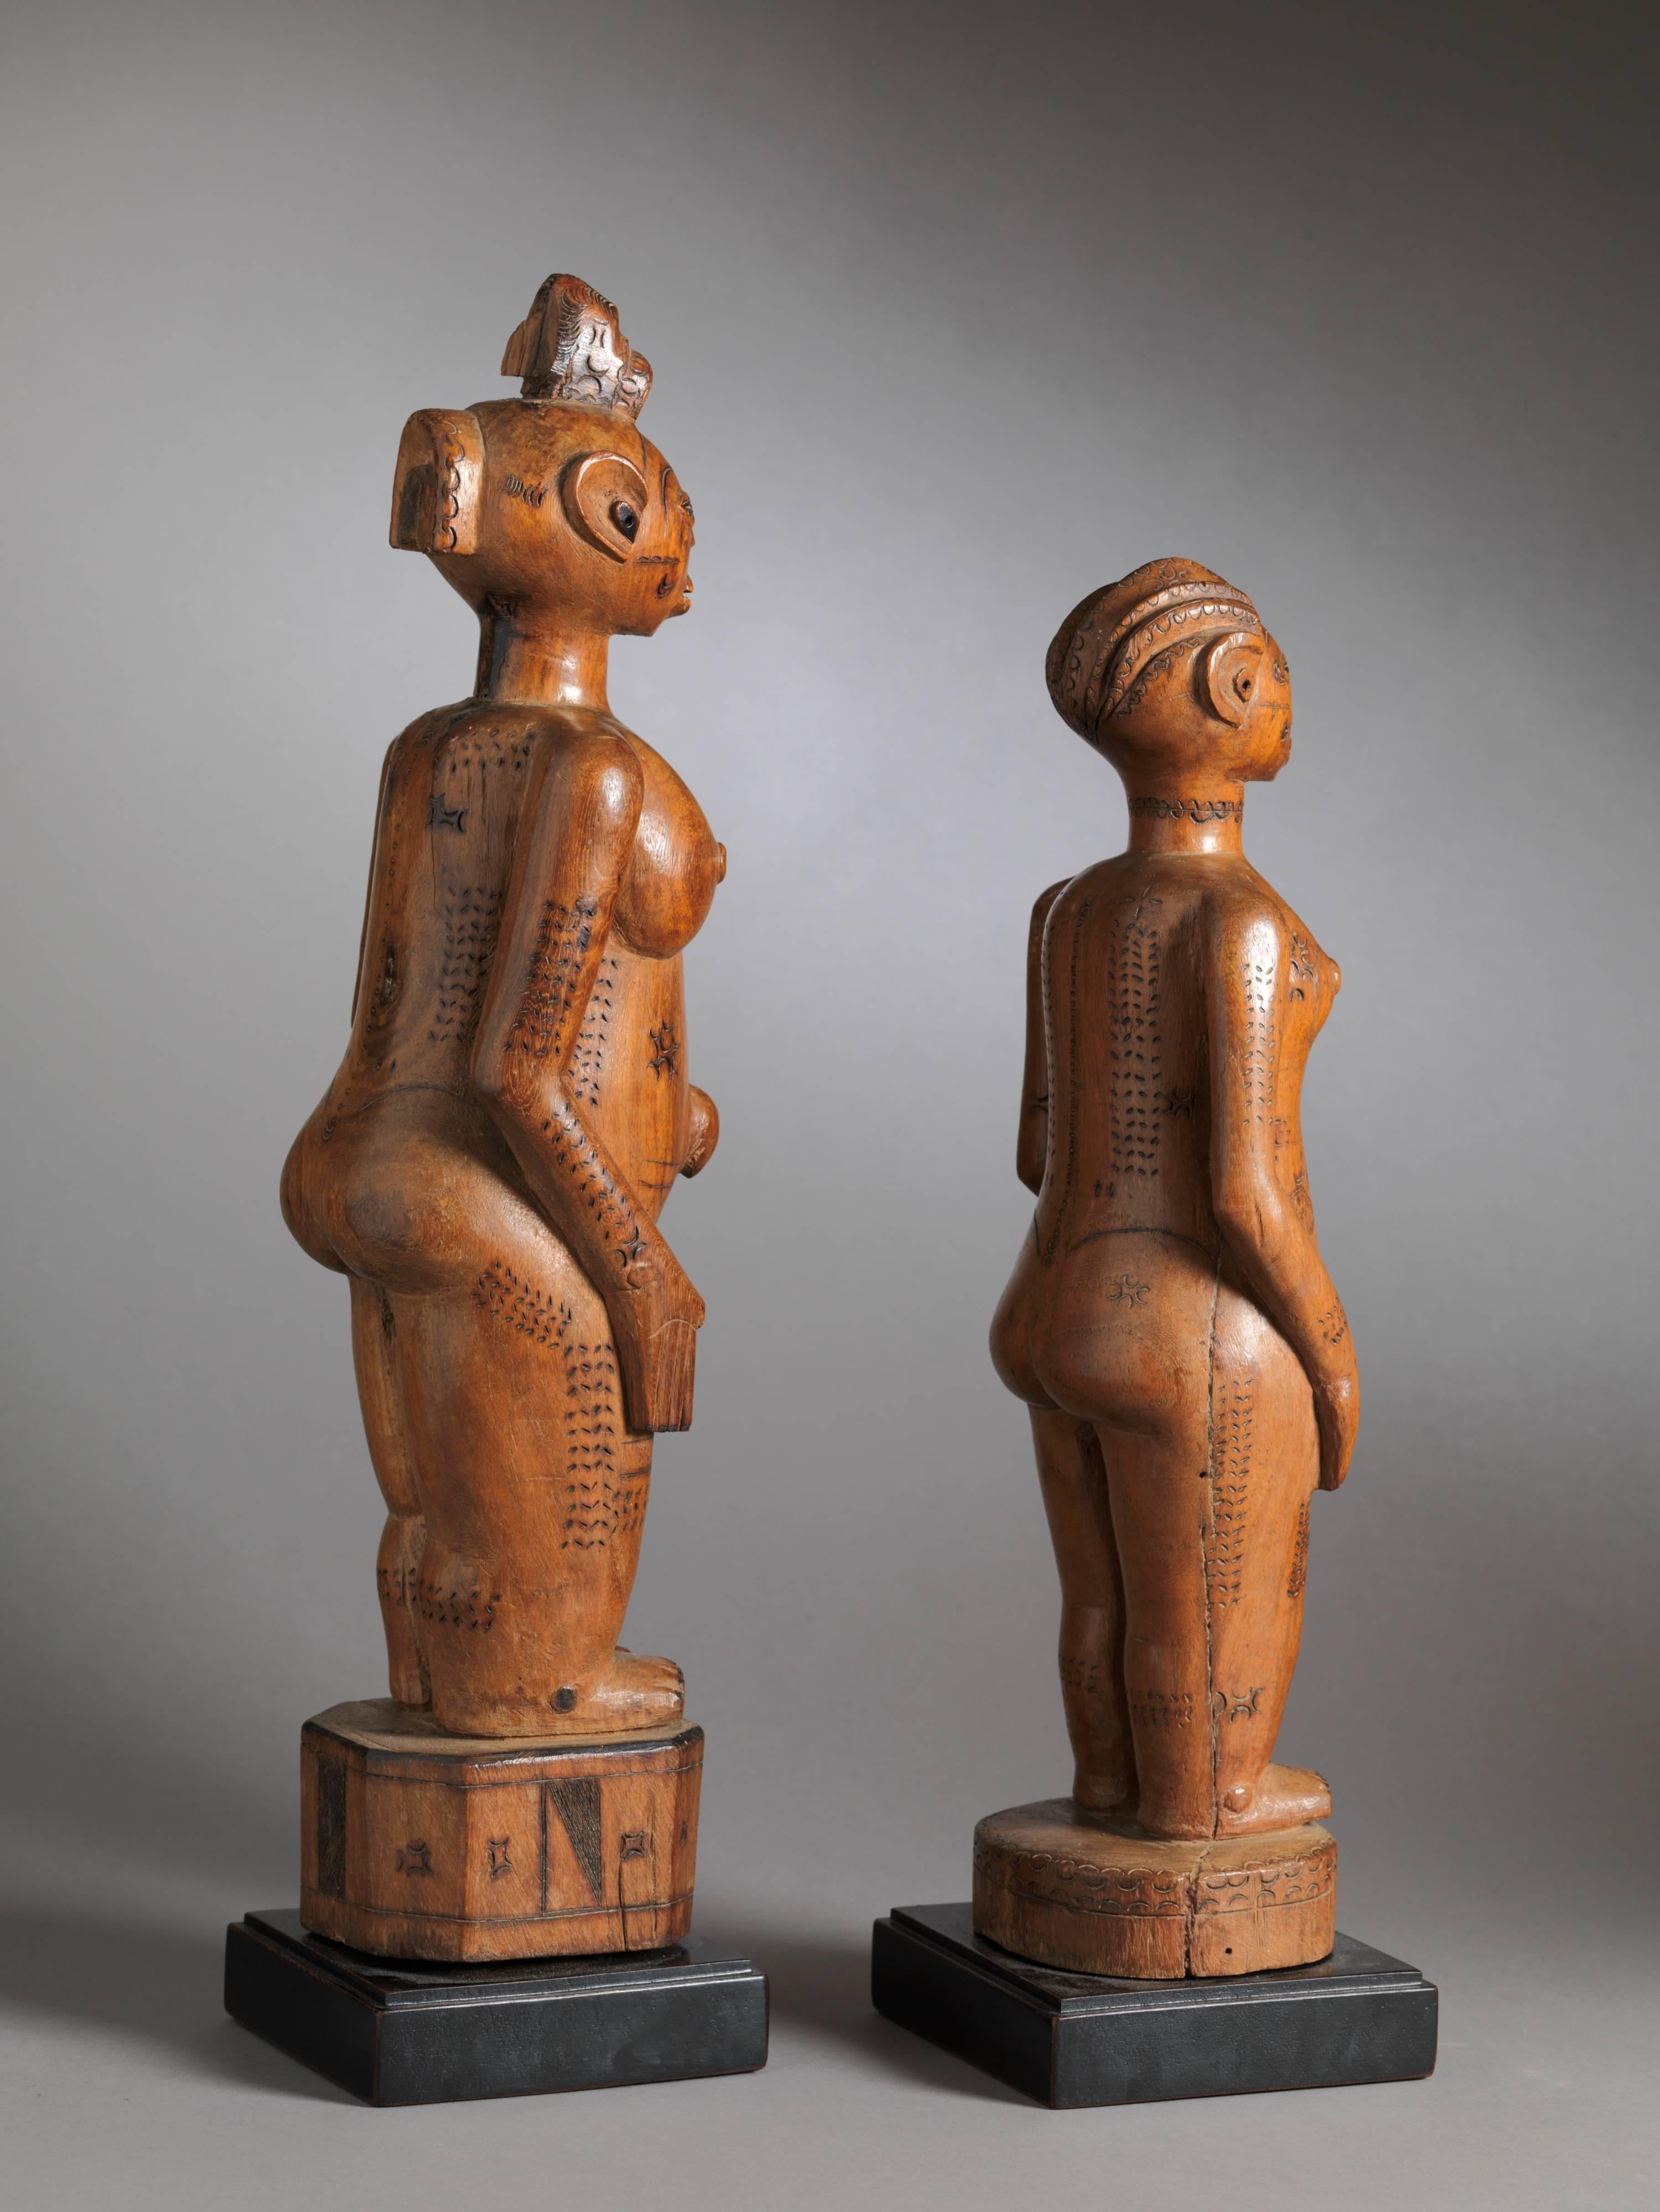 Exceptionally refined and rare Zela couple in medium dense yellow colored wood with a clear shiny patina. The sculptures' cap-like hairstyles are typical for the Zela as are the ritual scarification’s on the front and back of their bodies. Apart